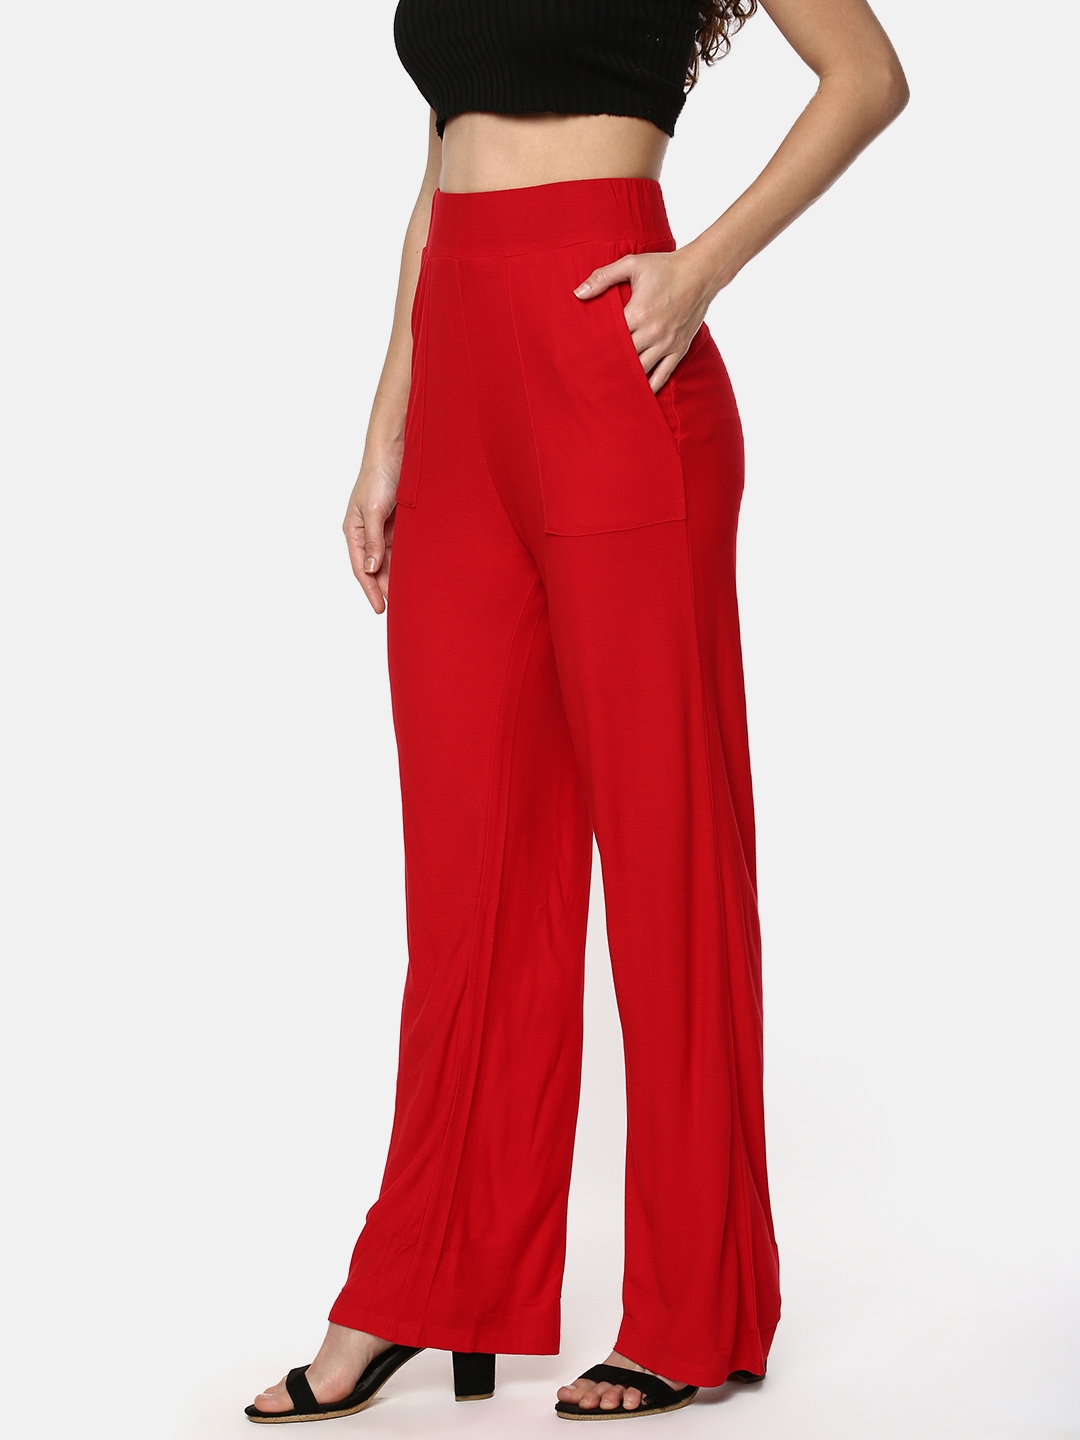 Y CAN F | YCANF Women's Casual Red Palazzos 1